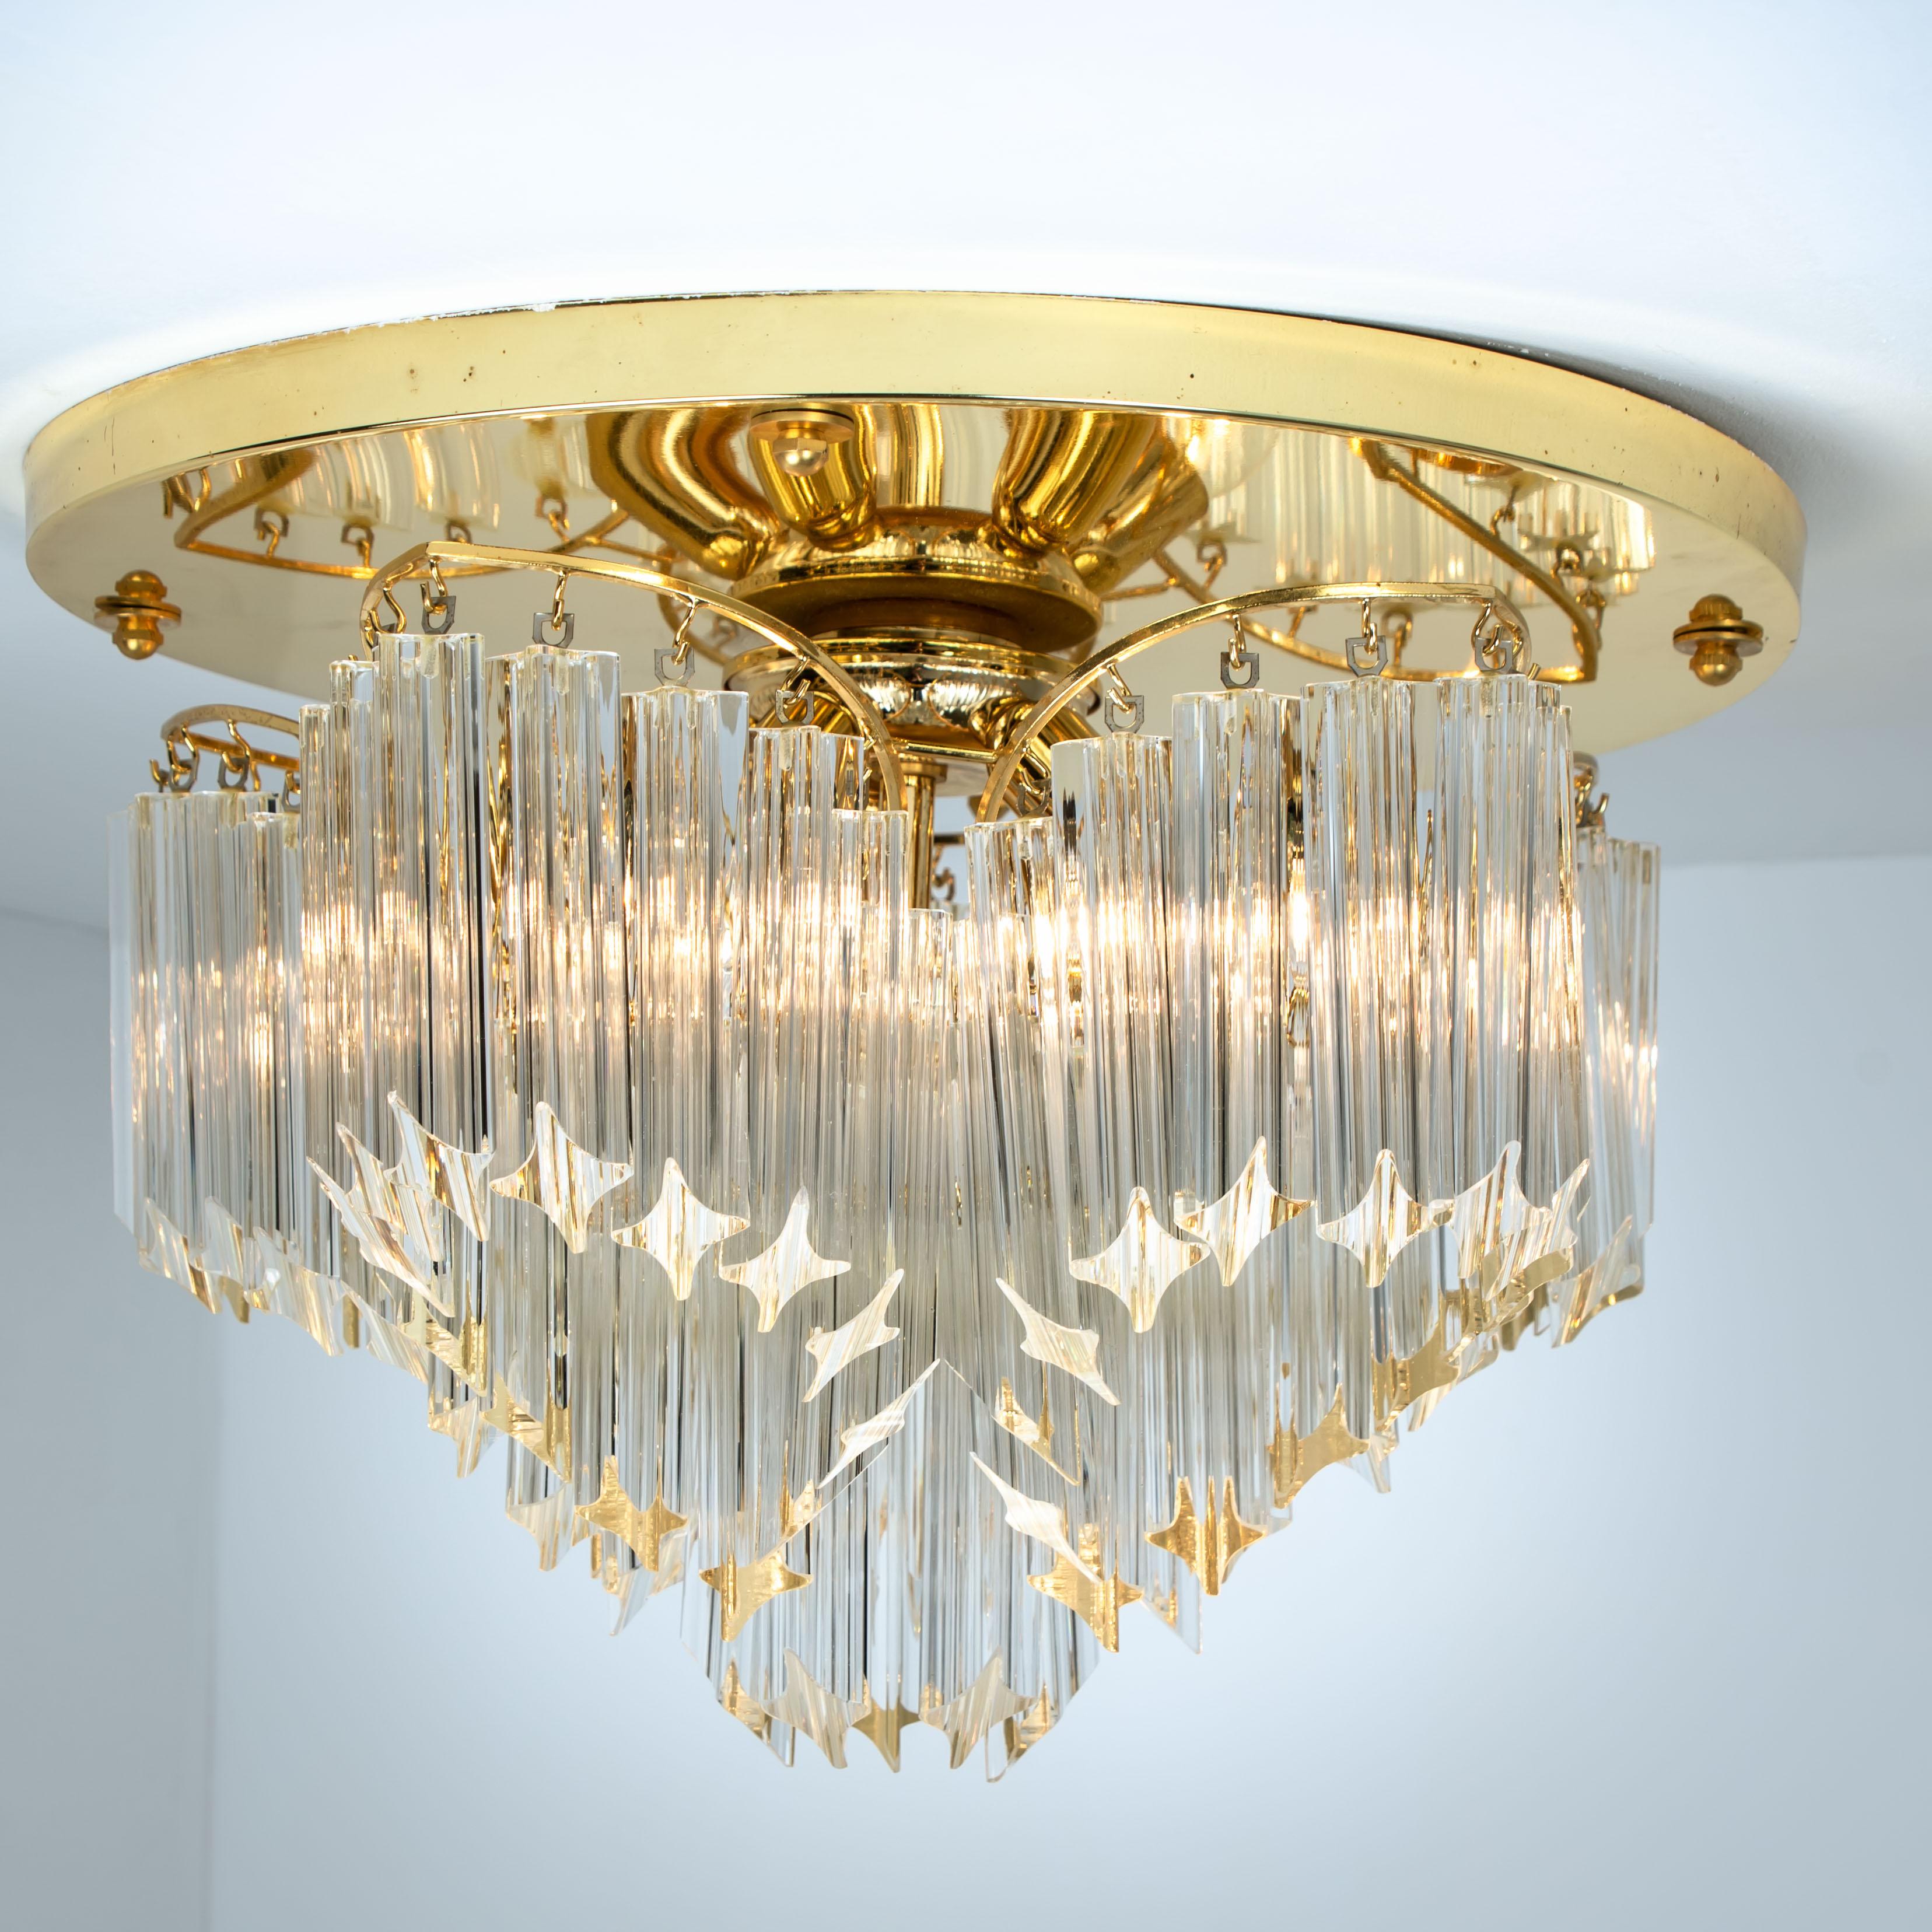 This exceptional flush mount was manufactured by Venini in Italy. The lamp has clear Murano Triedri crystals of varying lengths that create a great light effect. The crystals are suspended on beautifully constructed gold-plated frame.

This Venini